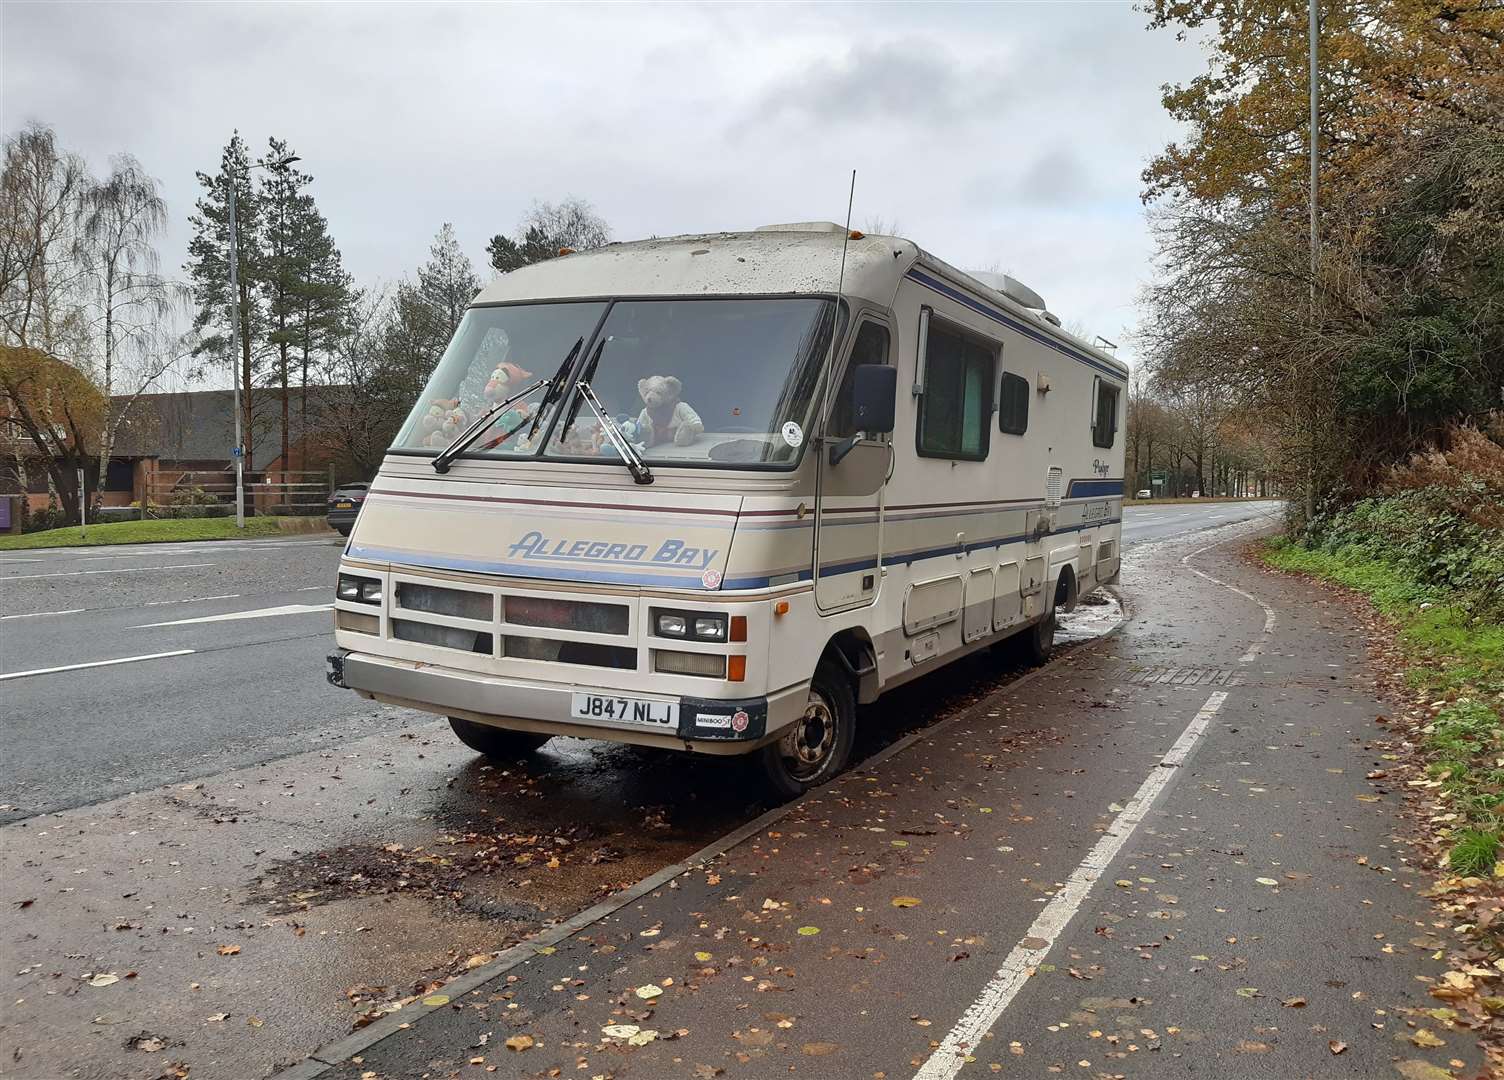 The motorhome has been parked in Simone Weil Avenue for more than two months